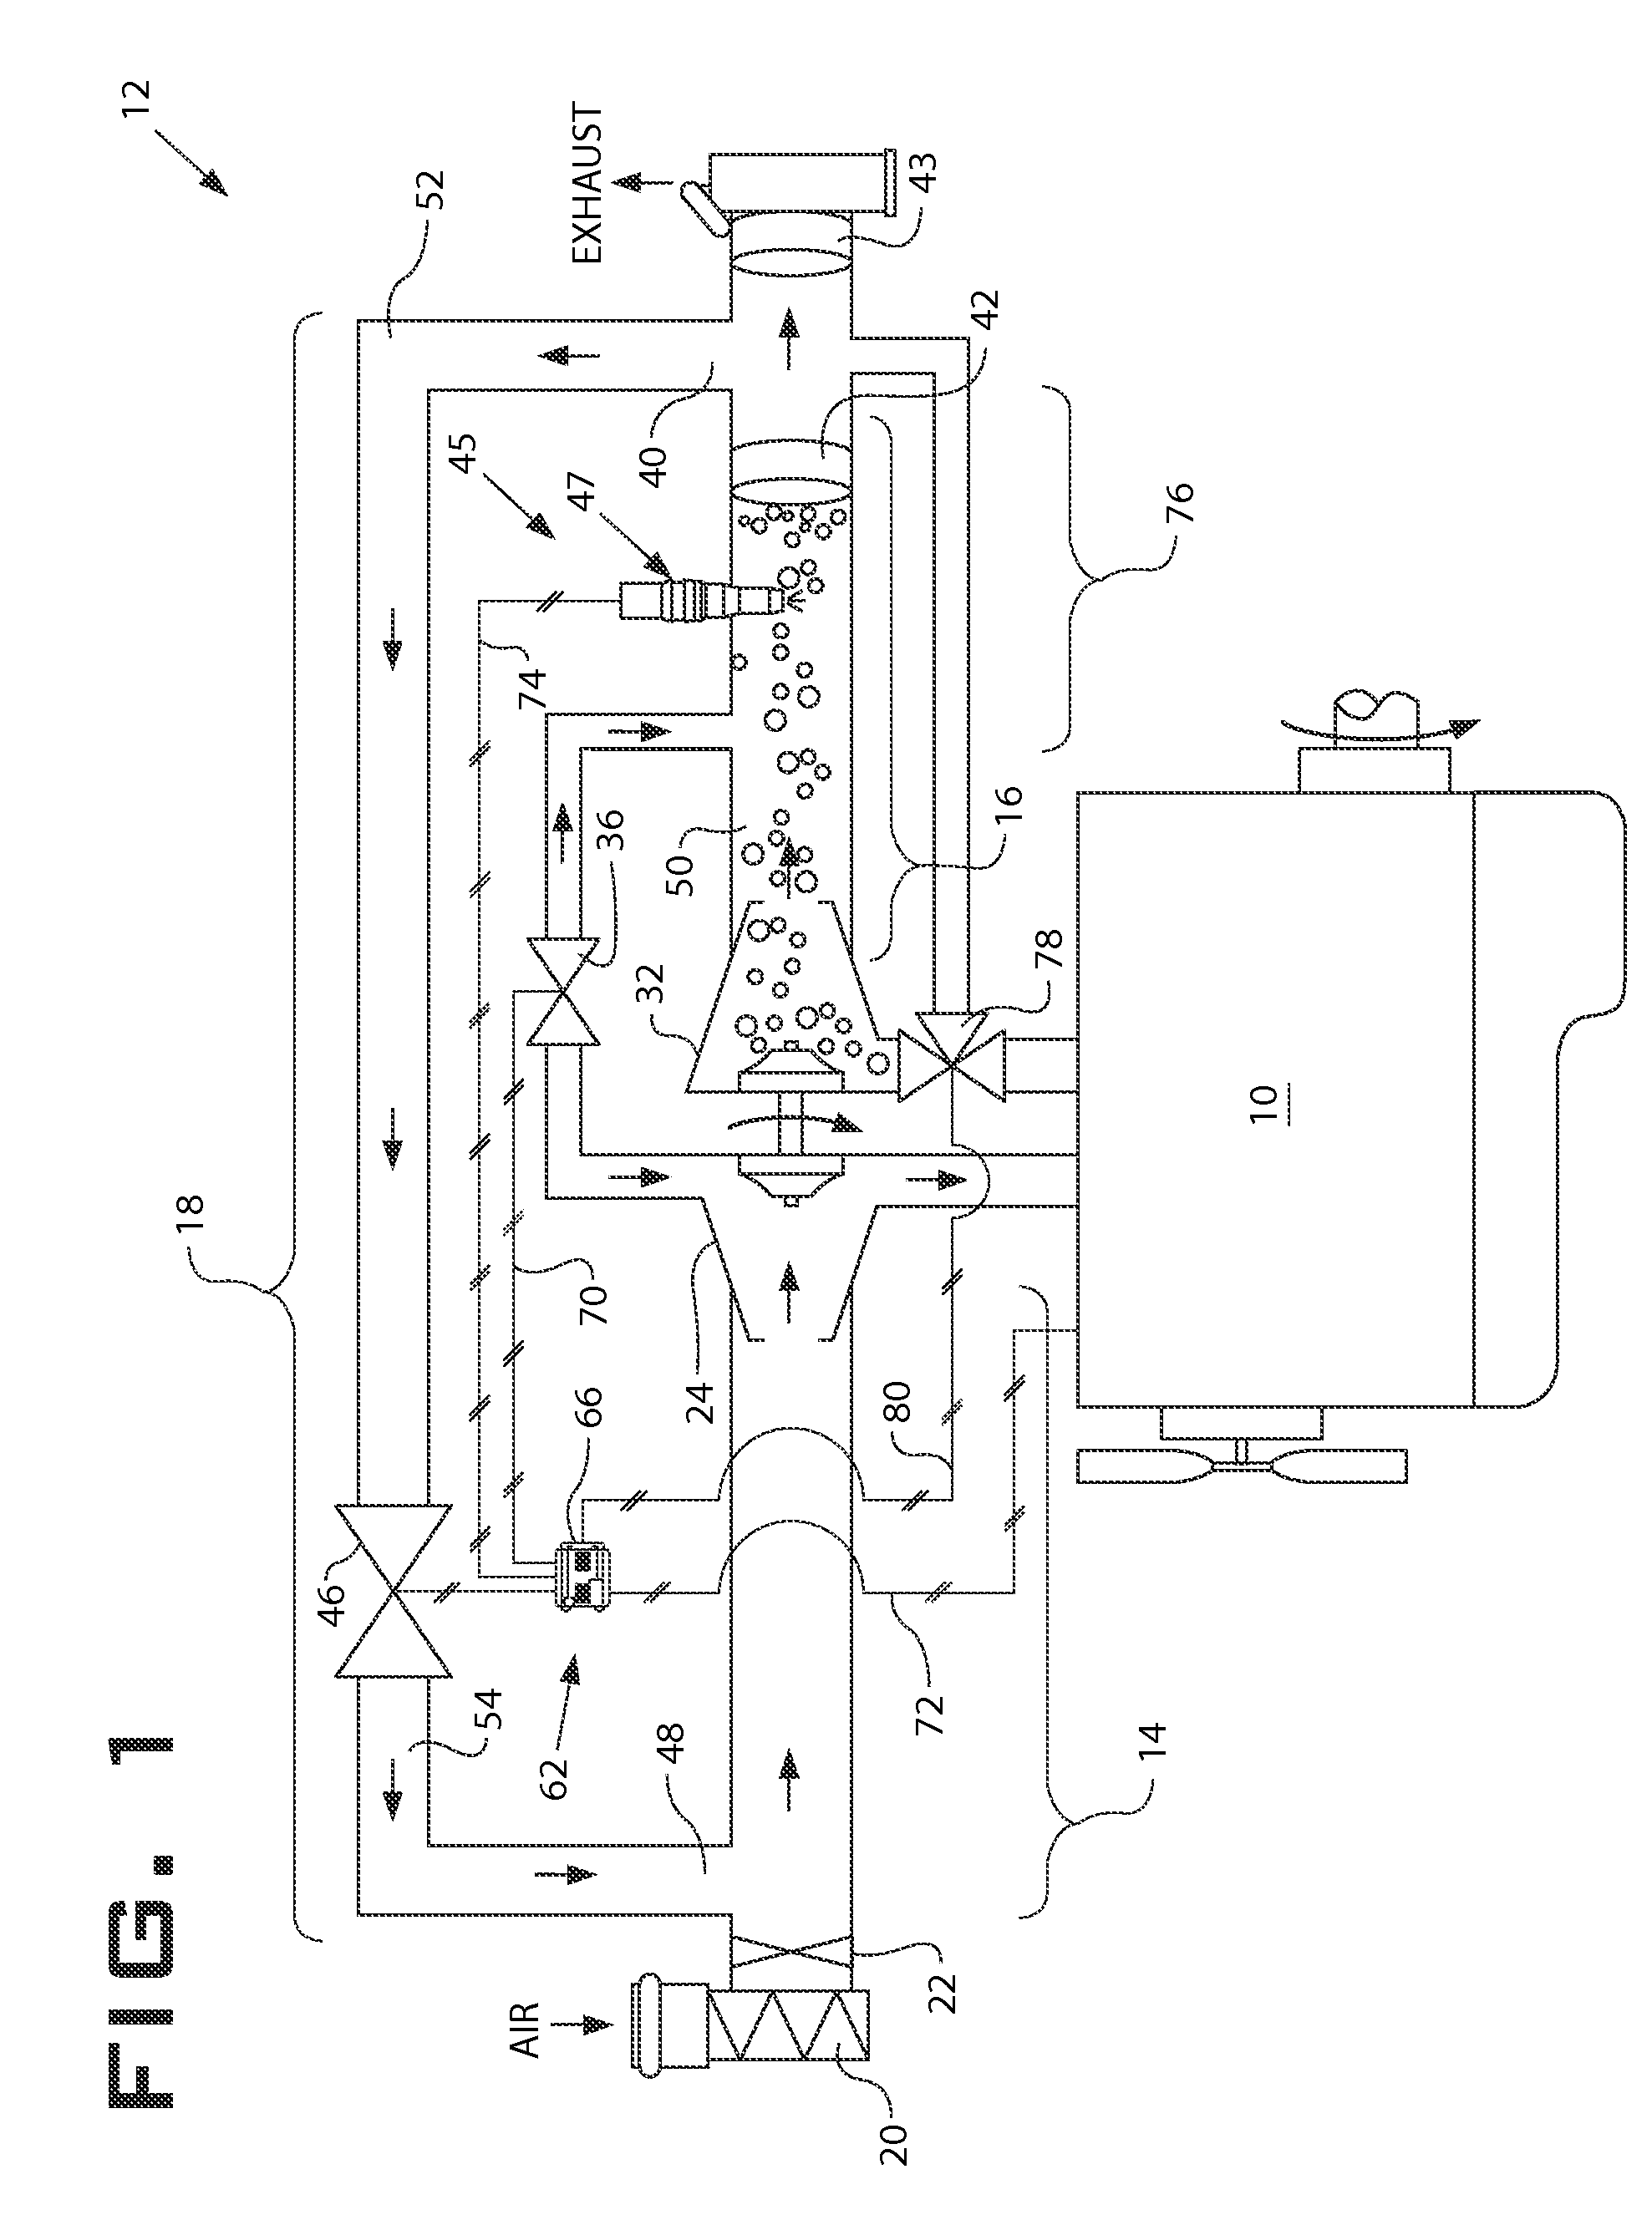 Method of controlling fuel in an exhaust treatment system implementing temporary engine control